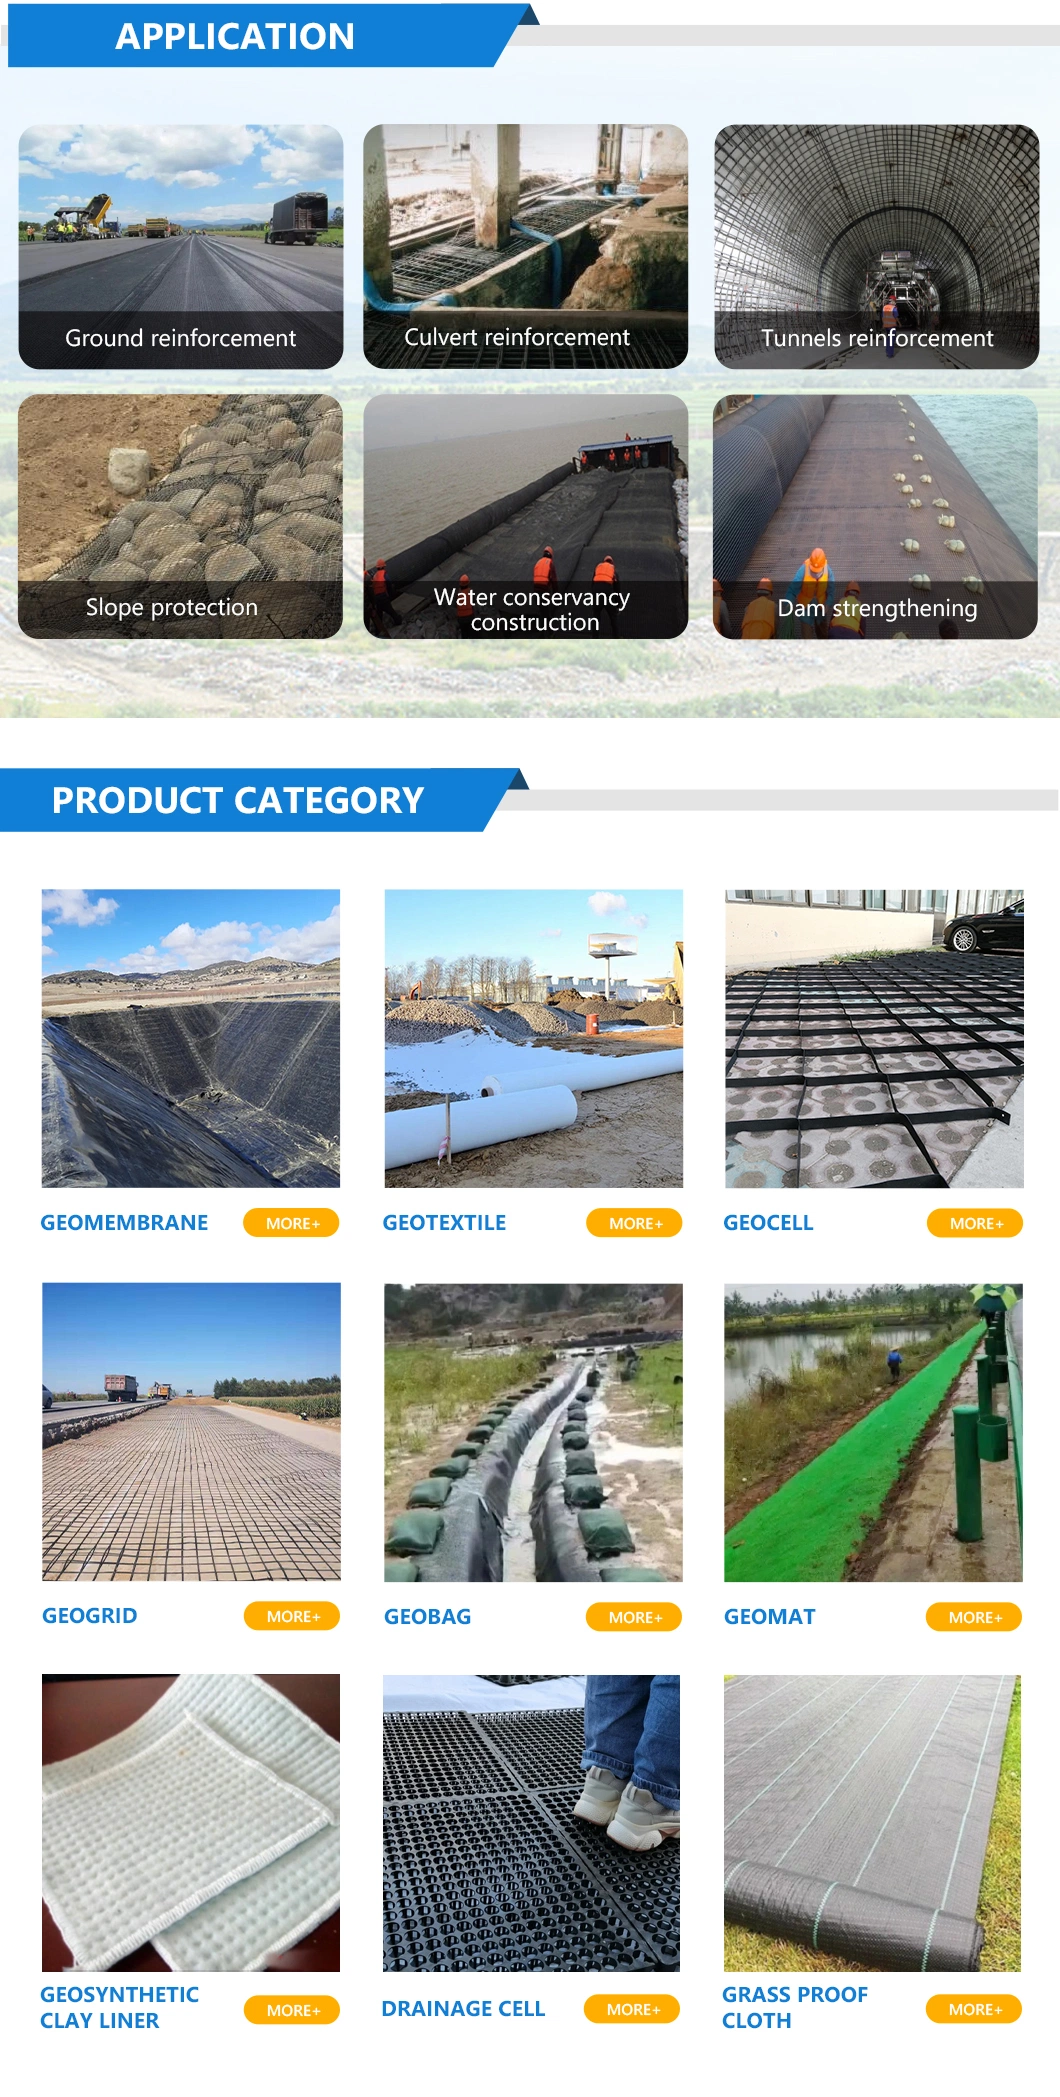 China Geogrid Manufacturer PP Plastic/Polyester Biaxial/Uniaxial Geogrid Manufacturer for Roadbed Bearing Capacity Improvement in Airfield